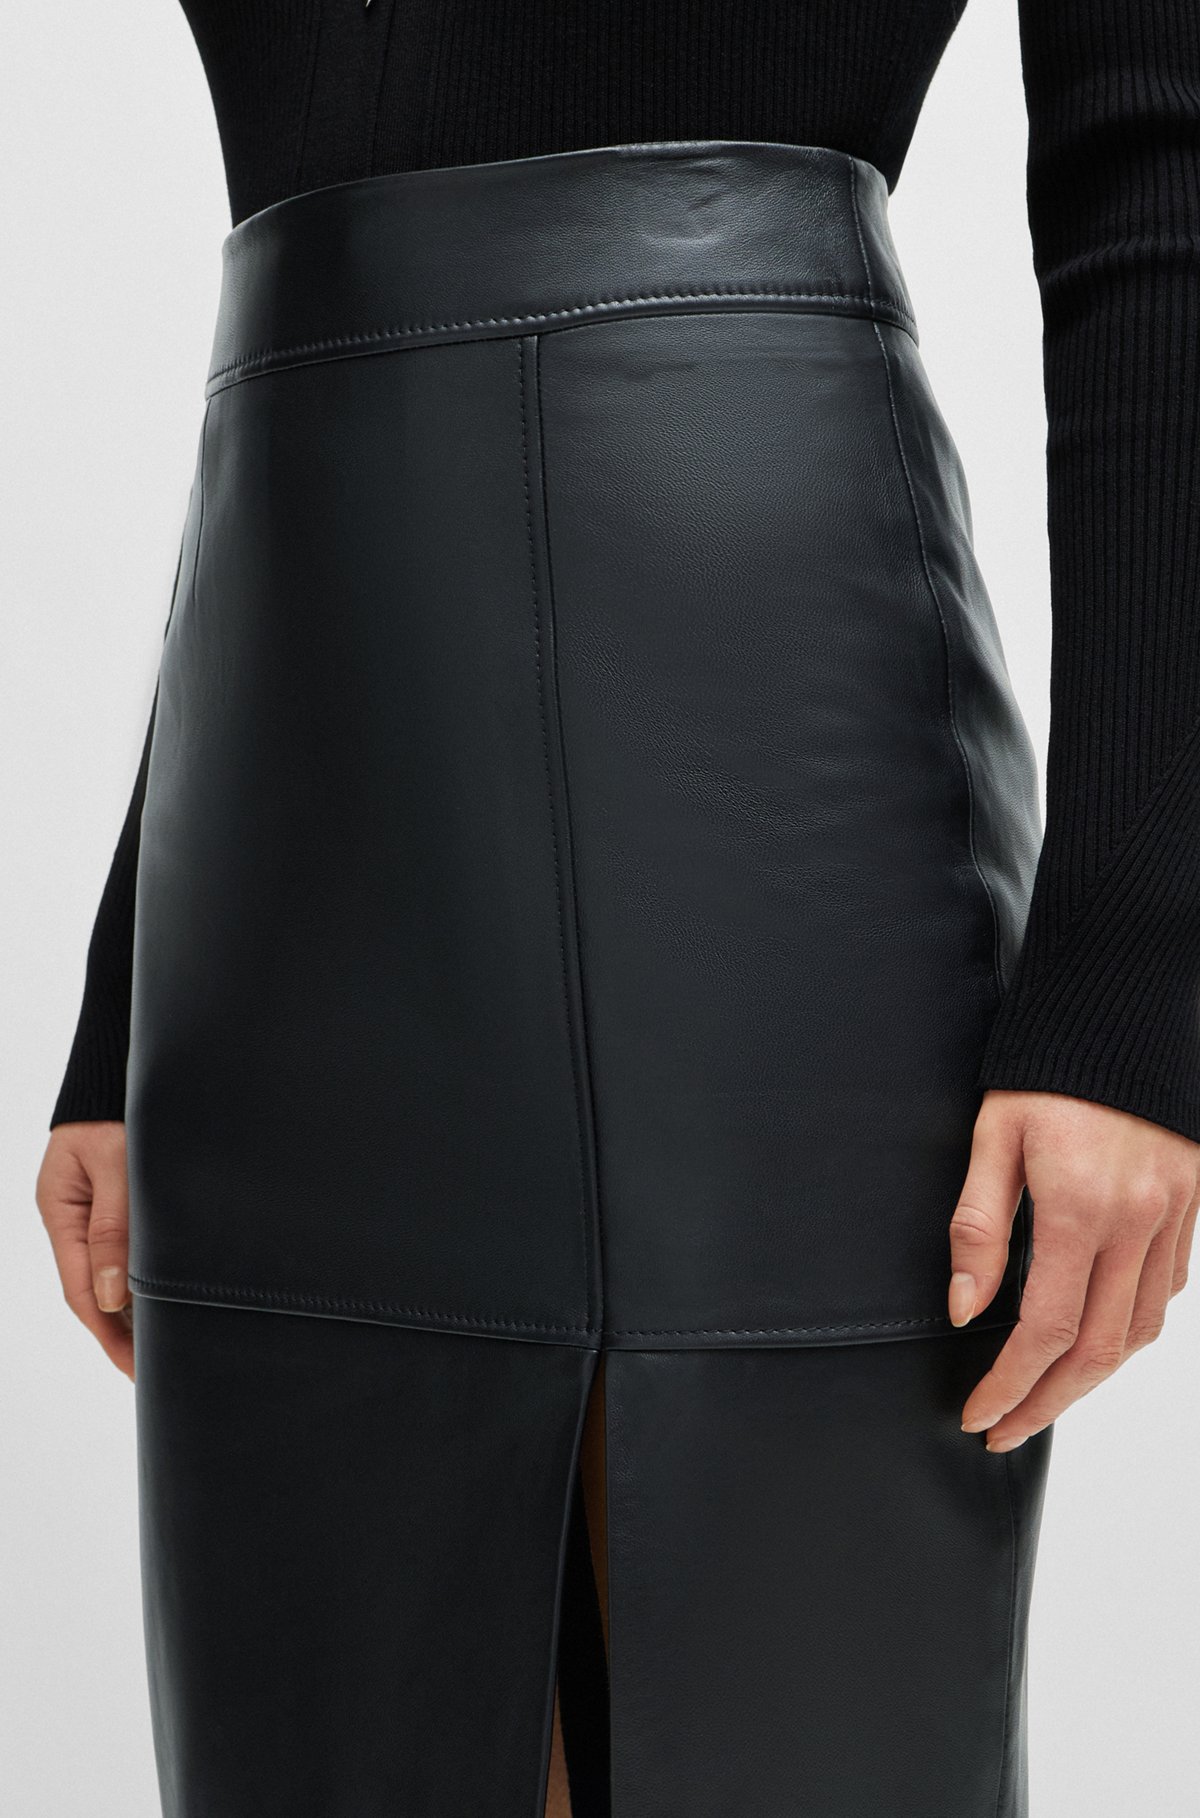 Slim-fit pencil skirt in leather, Black